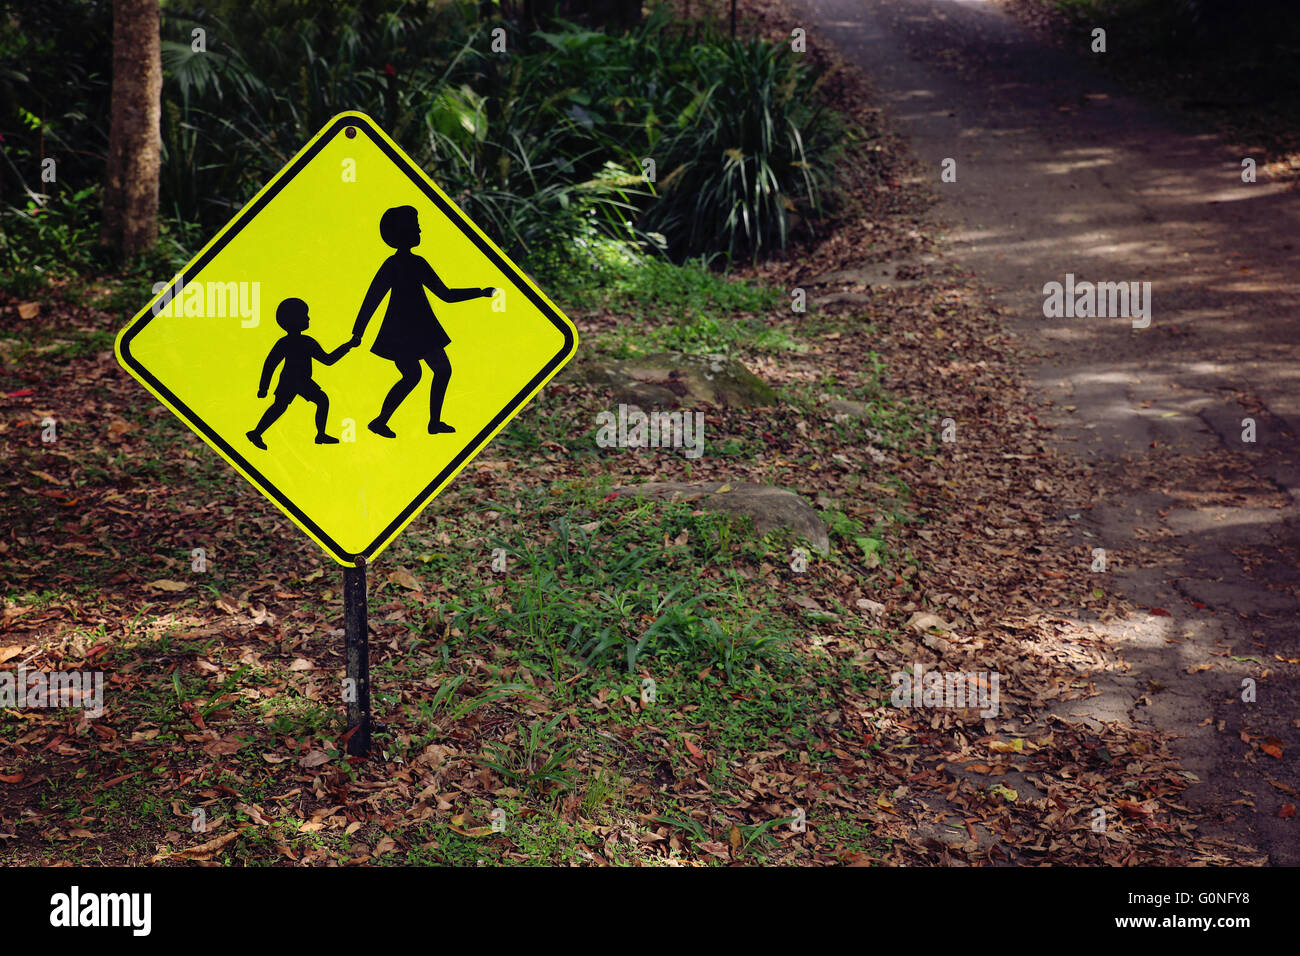 Rustic Yellow children crossing sign, vintage filter Stock Photo